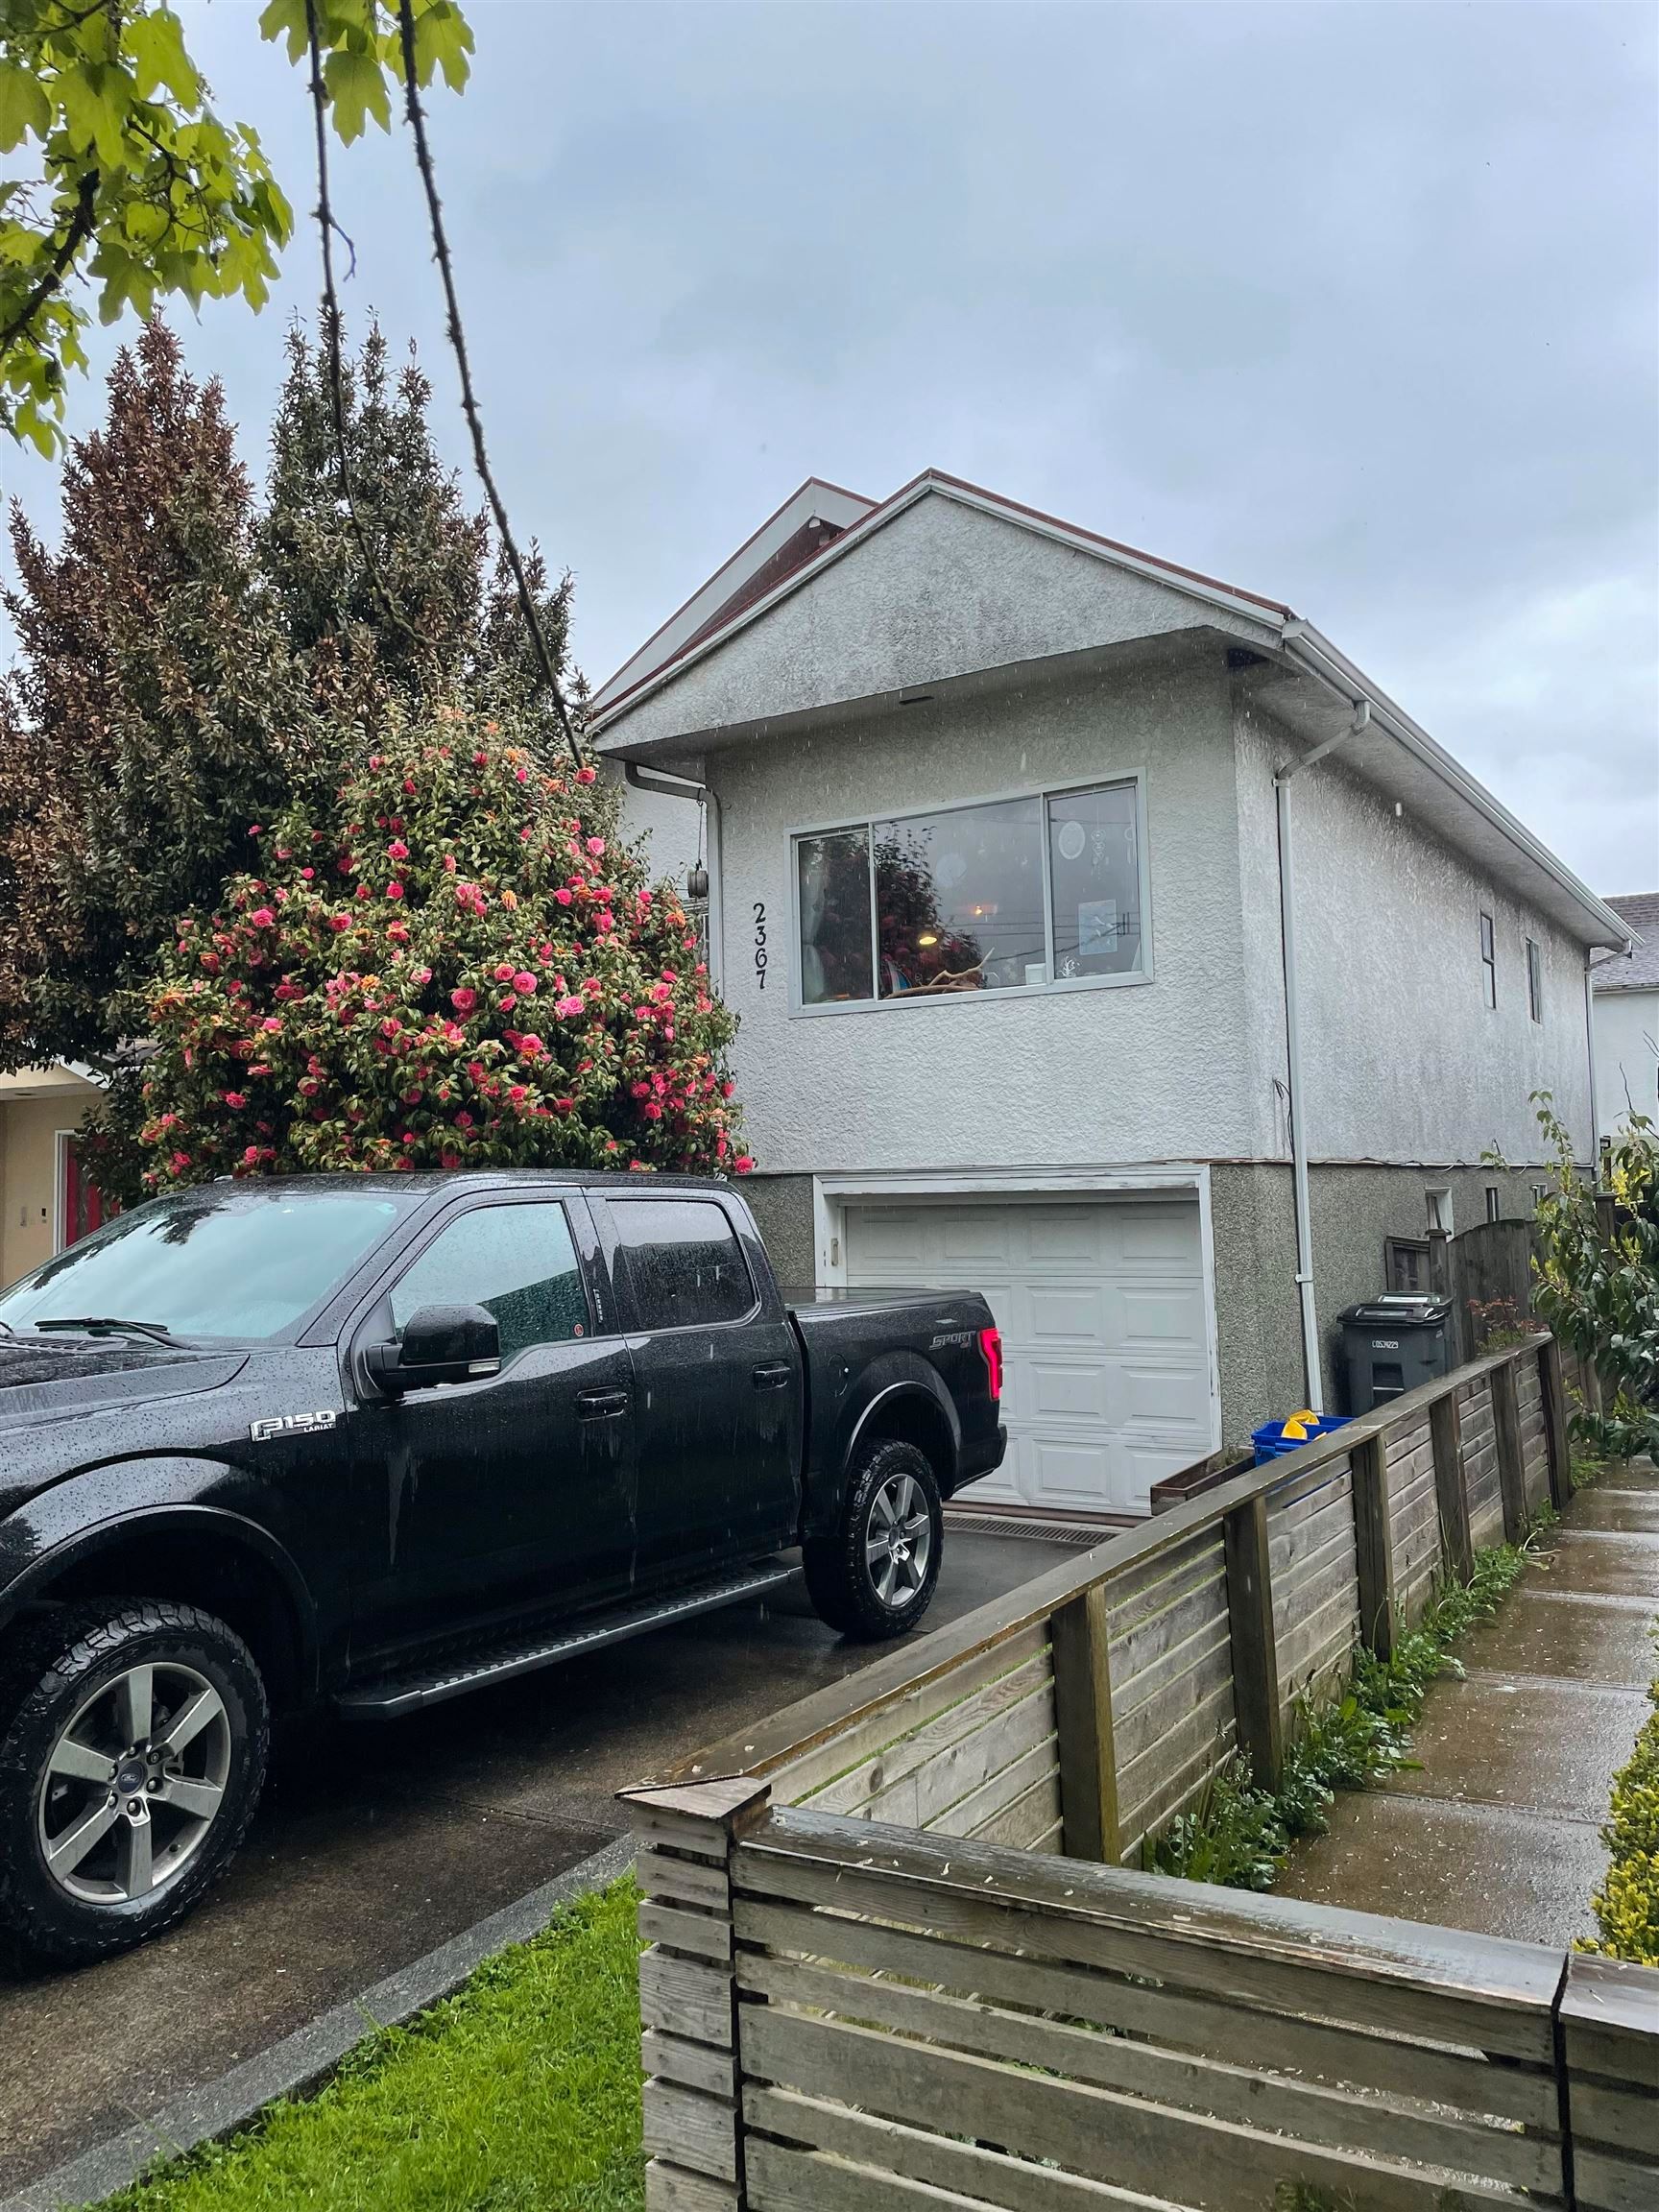 This property has sold: 2367 GEORGIA ST E in Vancouver